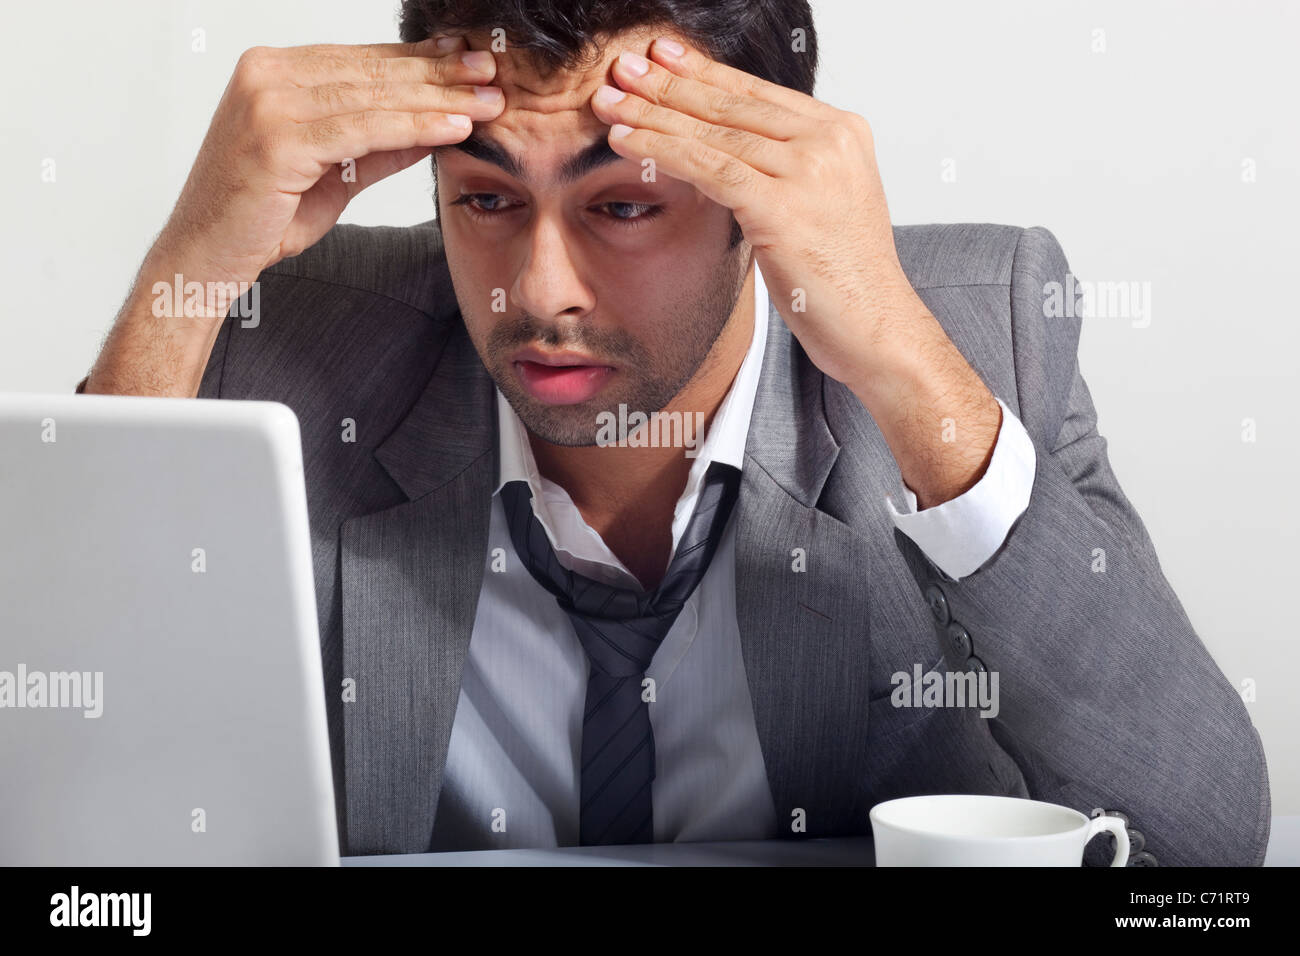 Businessman stressed at work Stock Photo